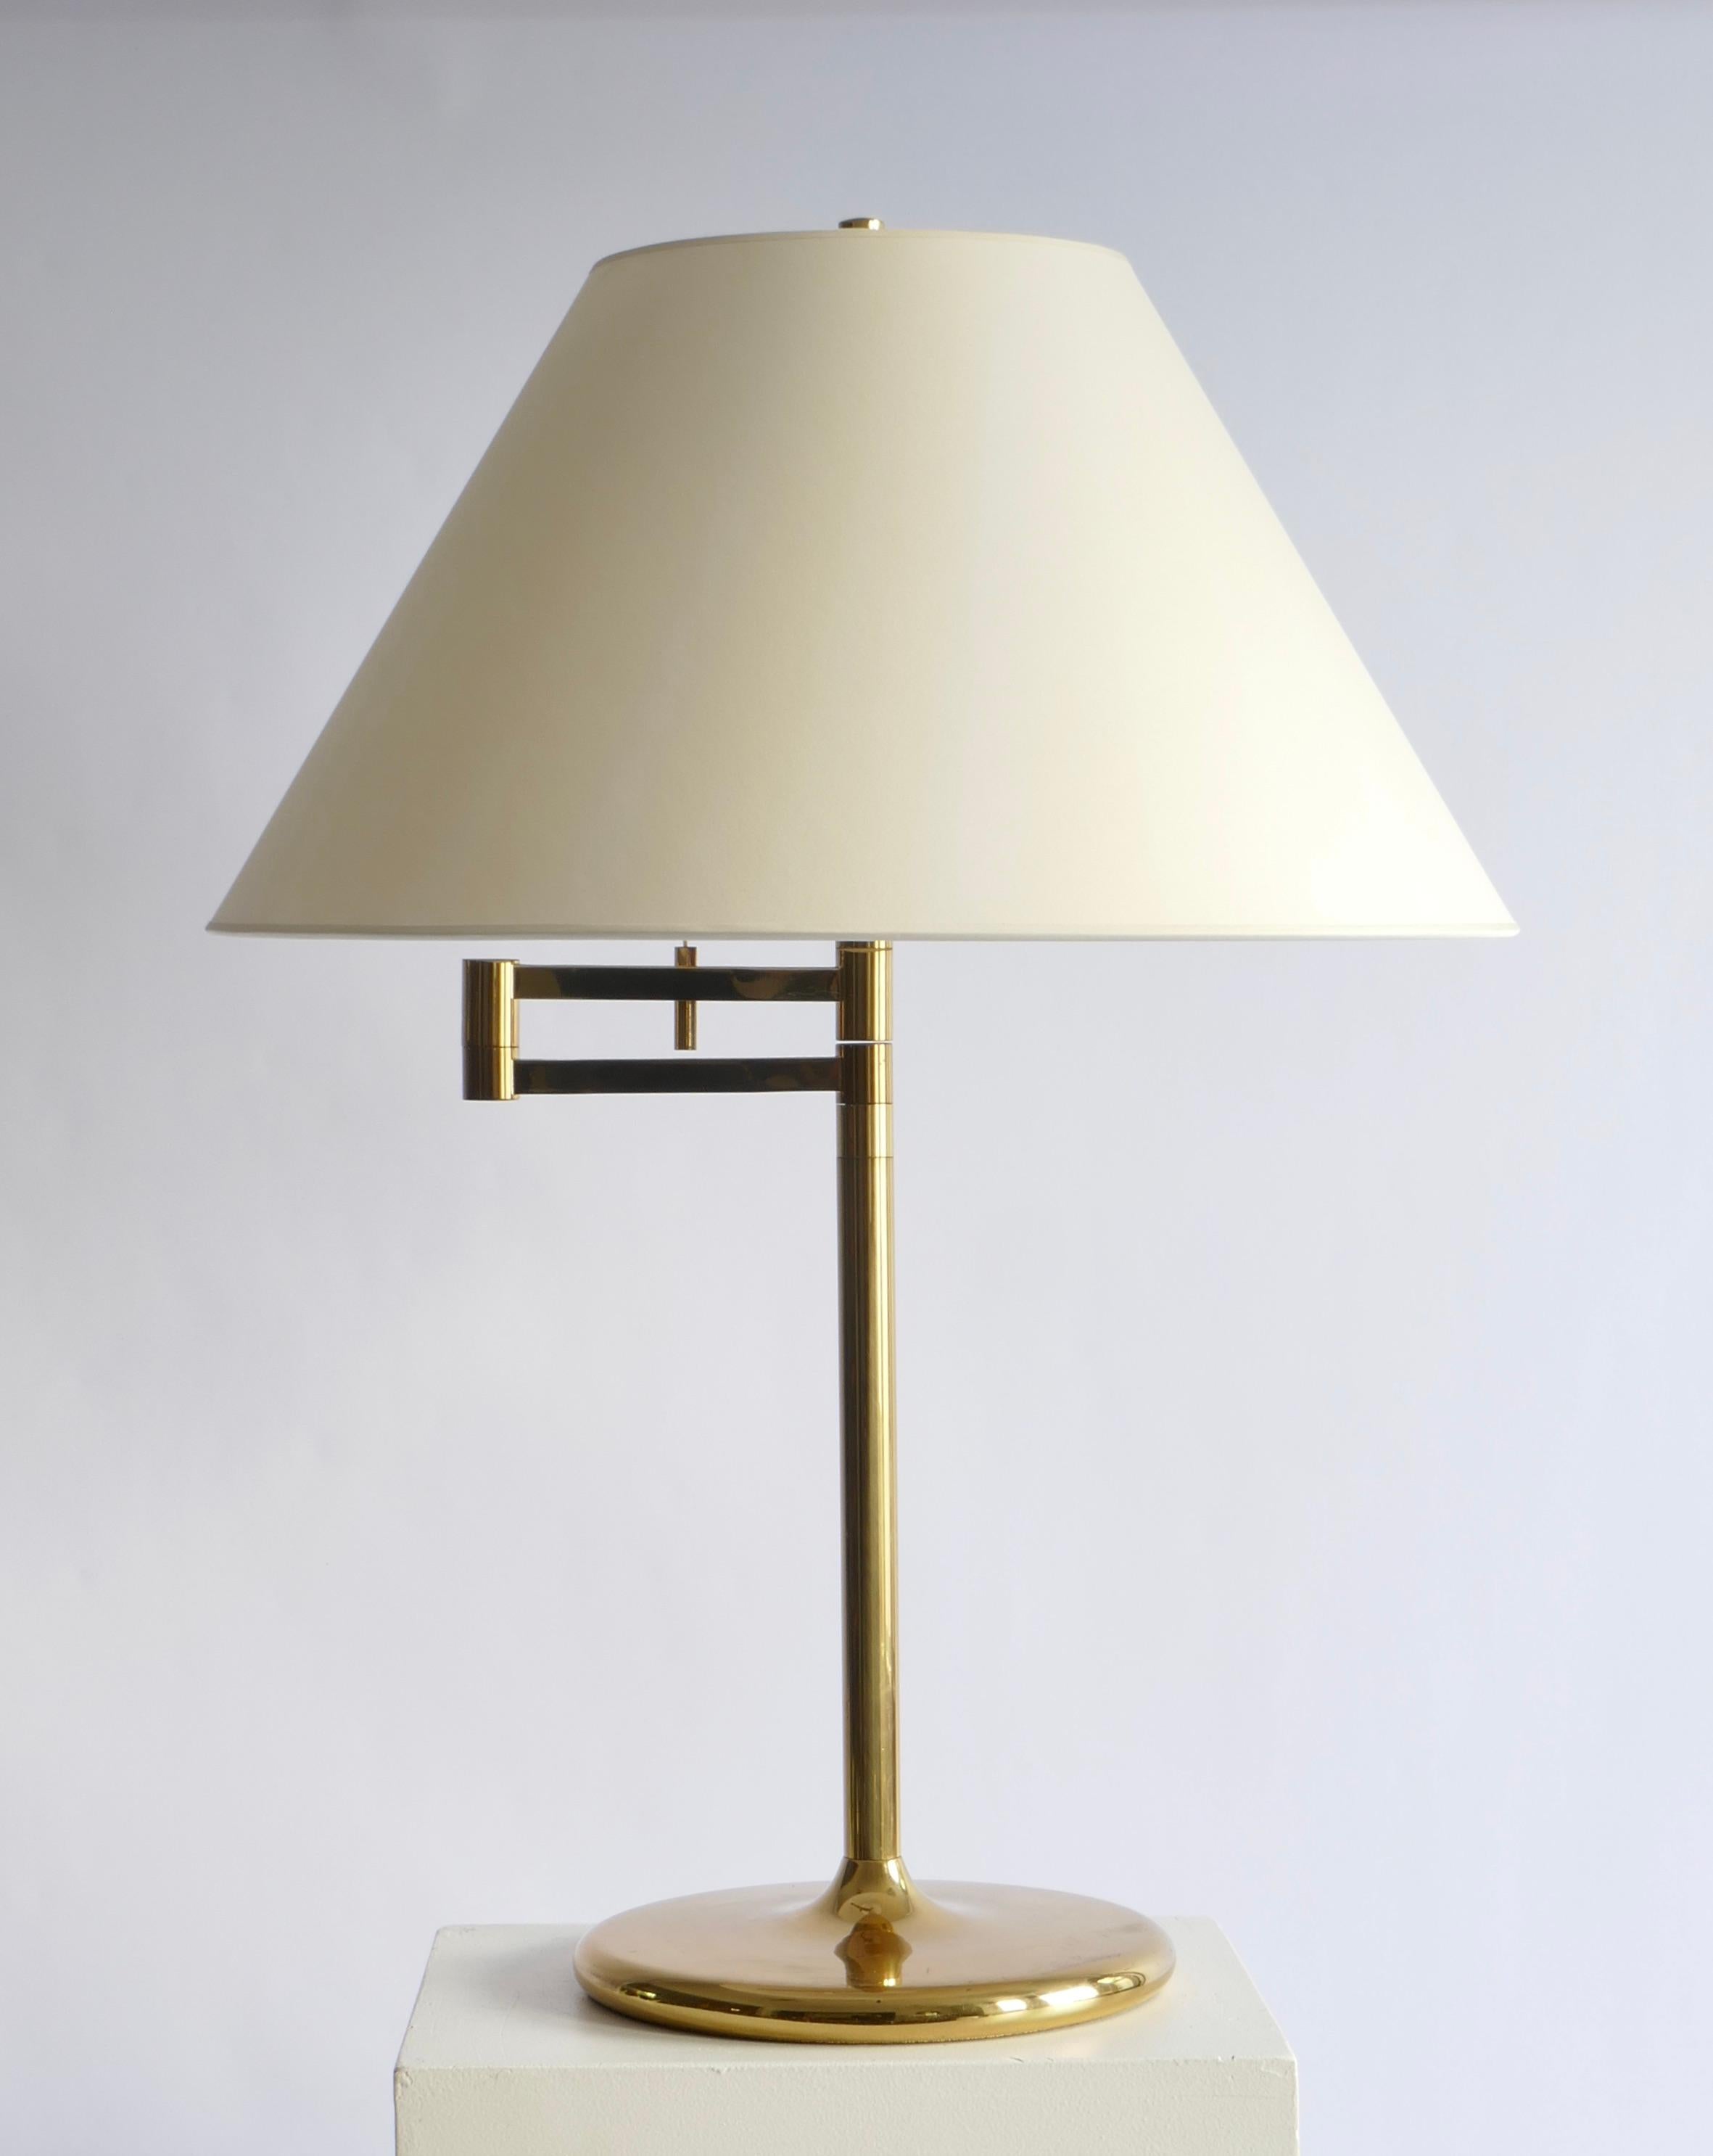 Large brass swing arm or adjustable table lamp, Germany, 1970s.